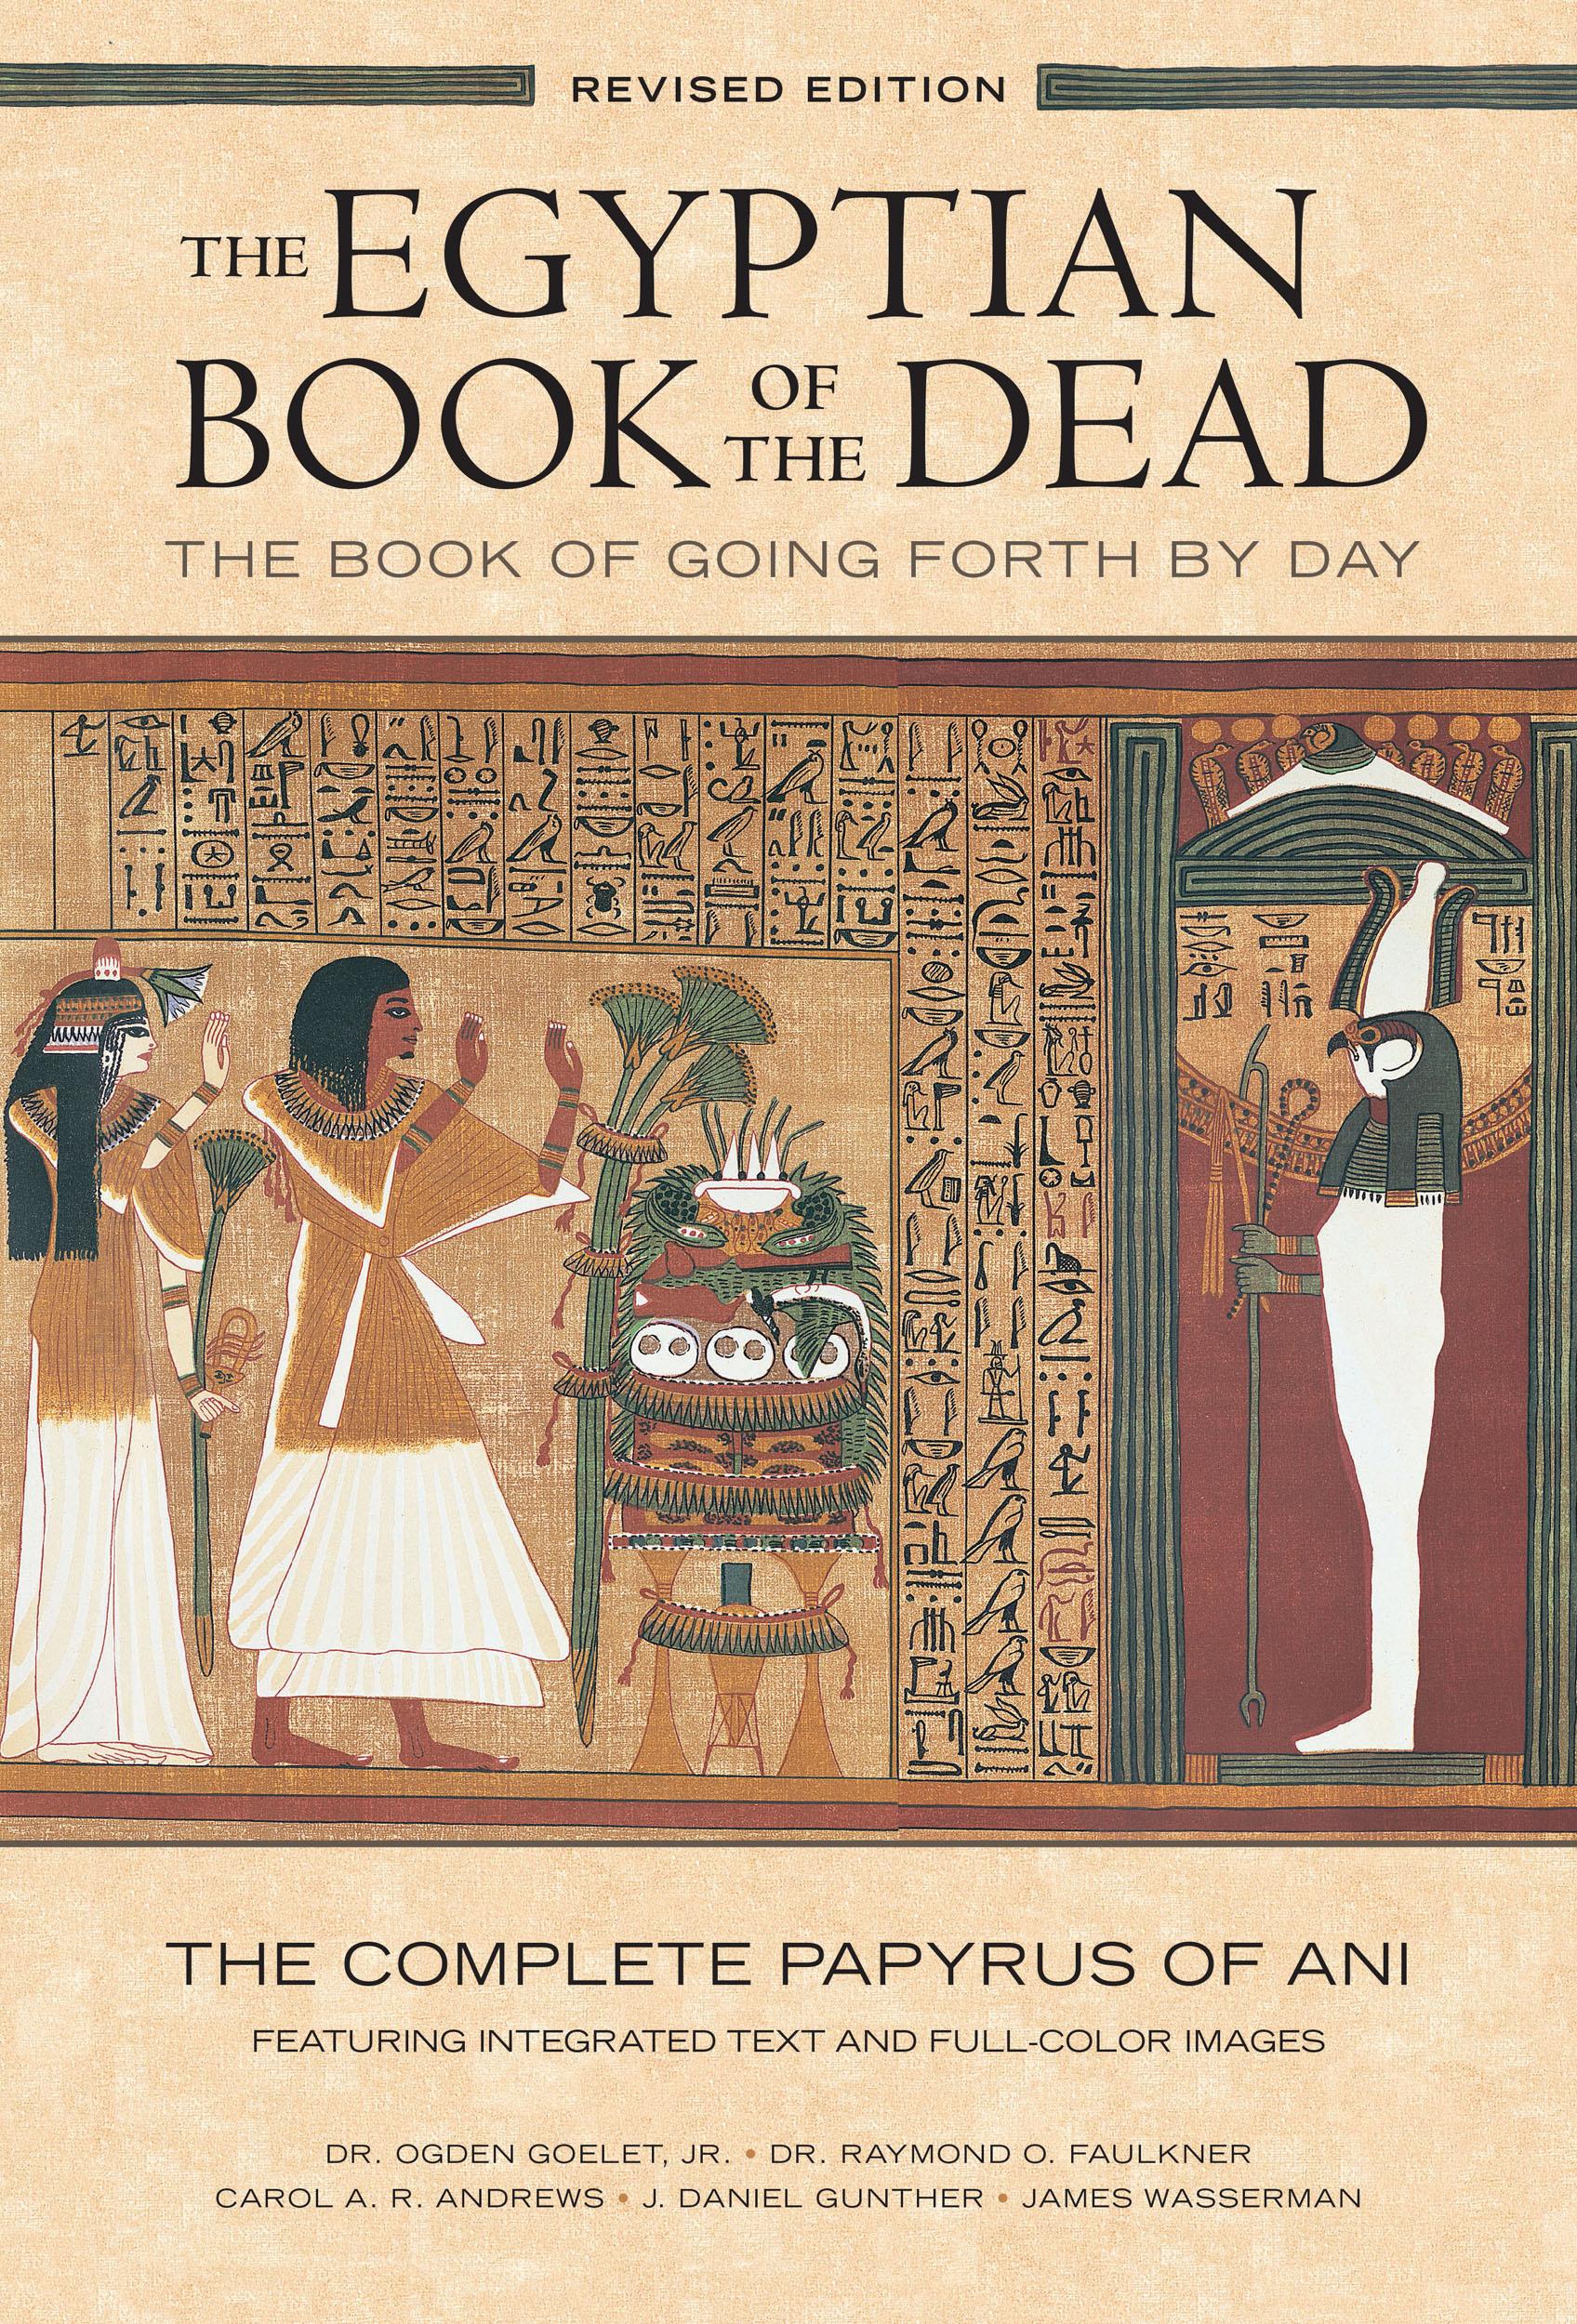 The Egyptian Book of the Dead: The Book of Going Forth by Day : The Complete Papyrus of Ani Featuring Integrated Text and Full-Color Images (History ... Mythology Books, History of Ancient Egypt) - Goelet, Ogden